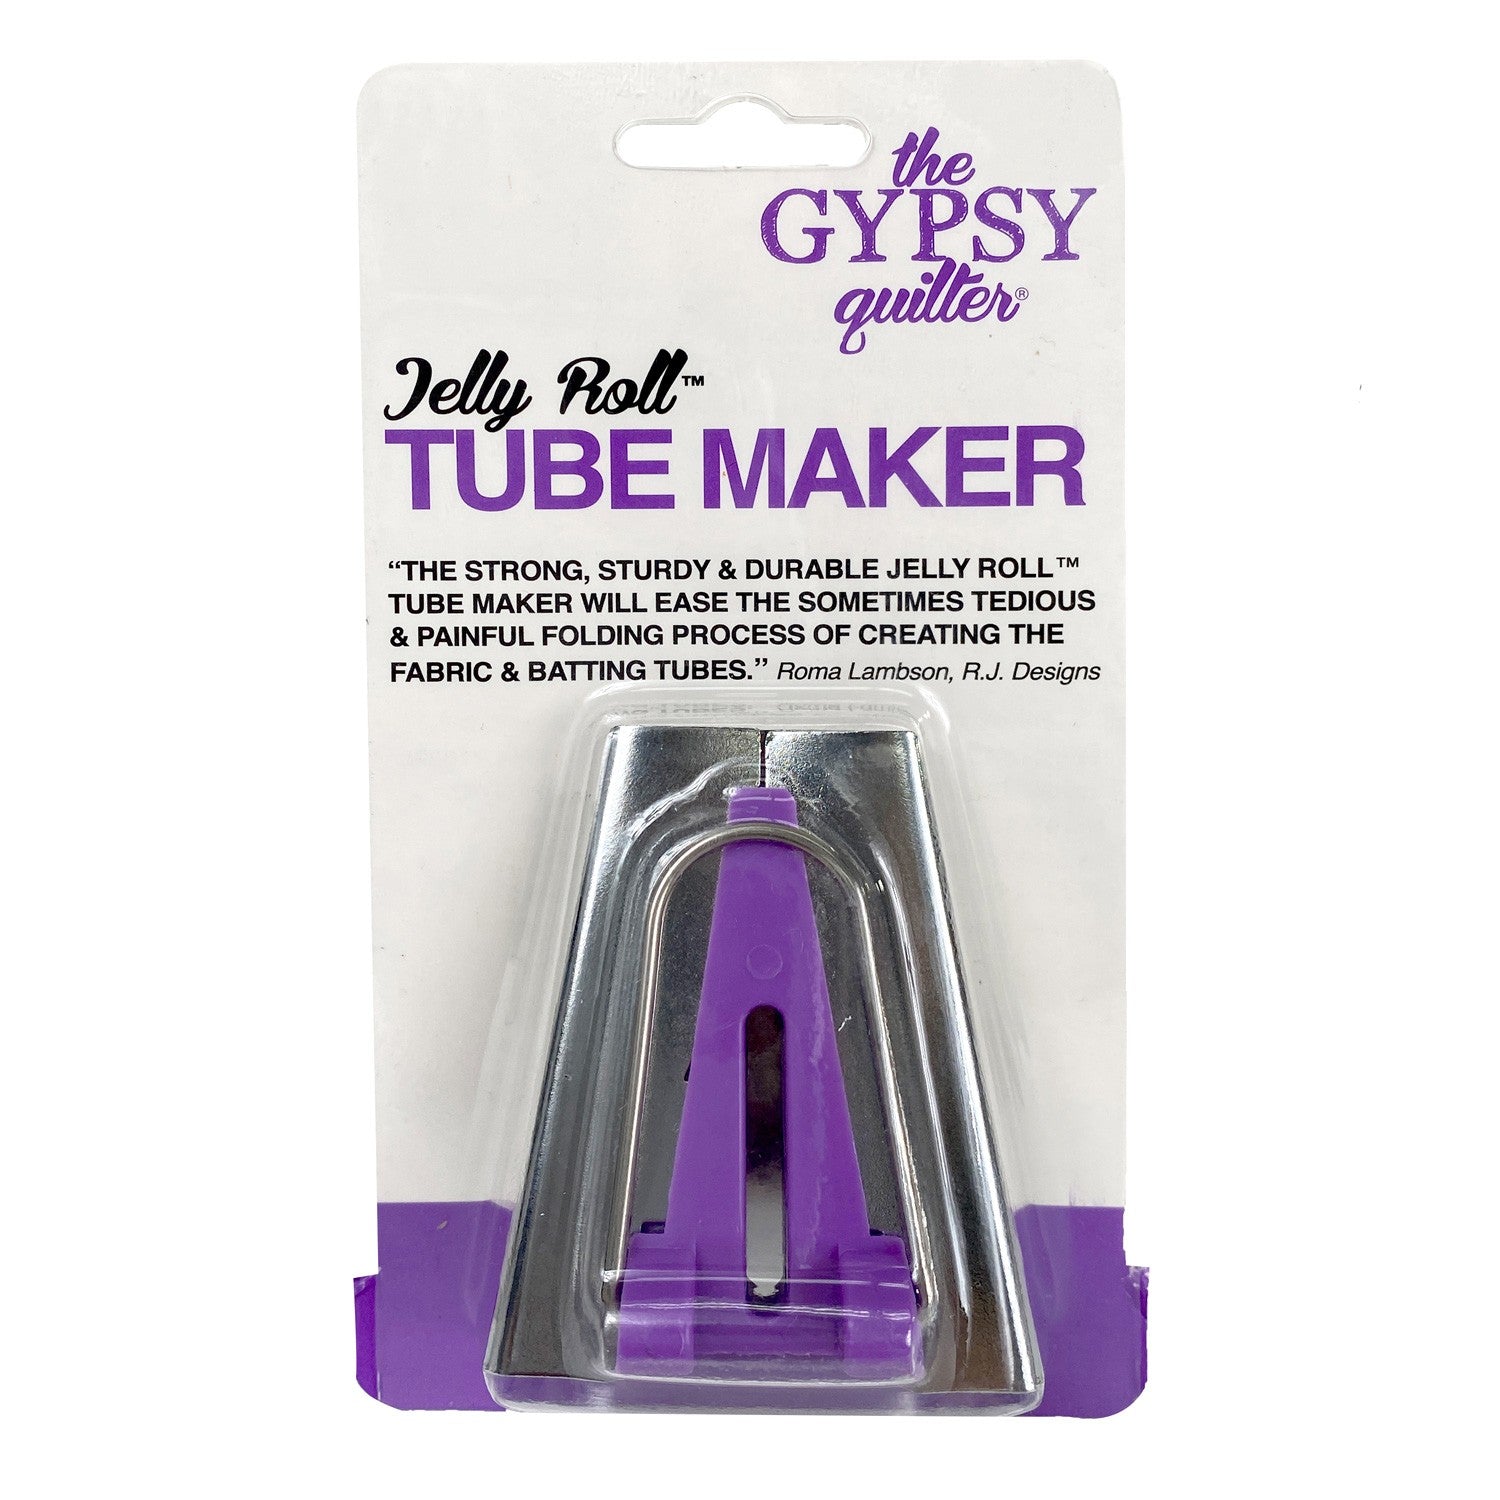 Jelly Roll Tube Maker from The Gypsy Quilter